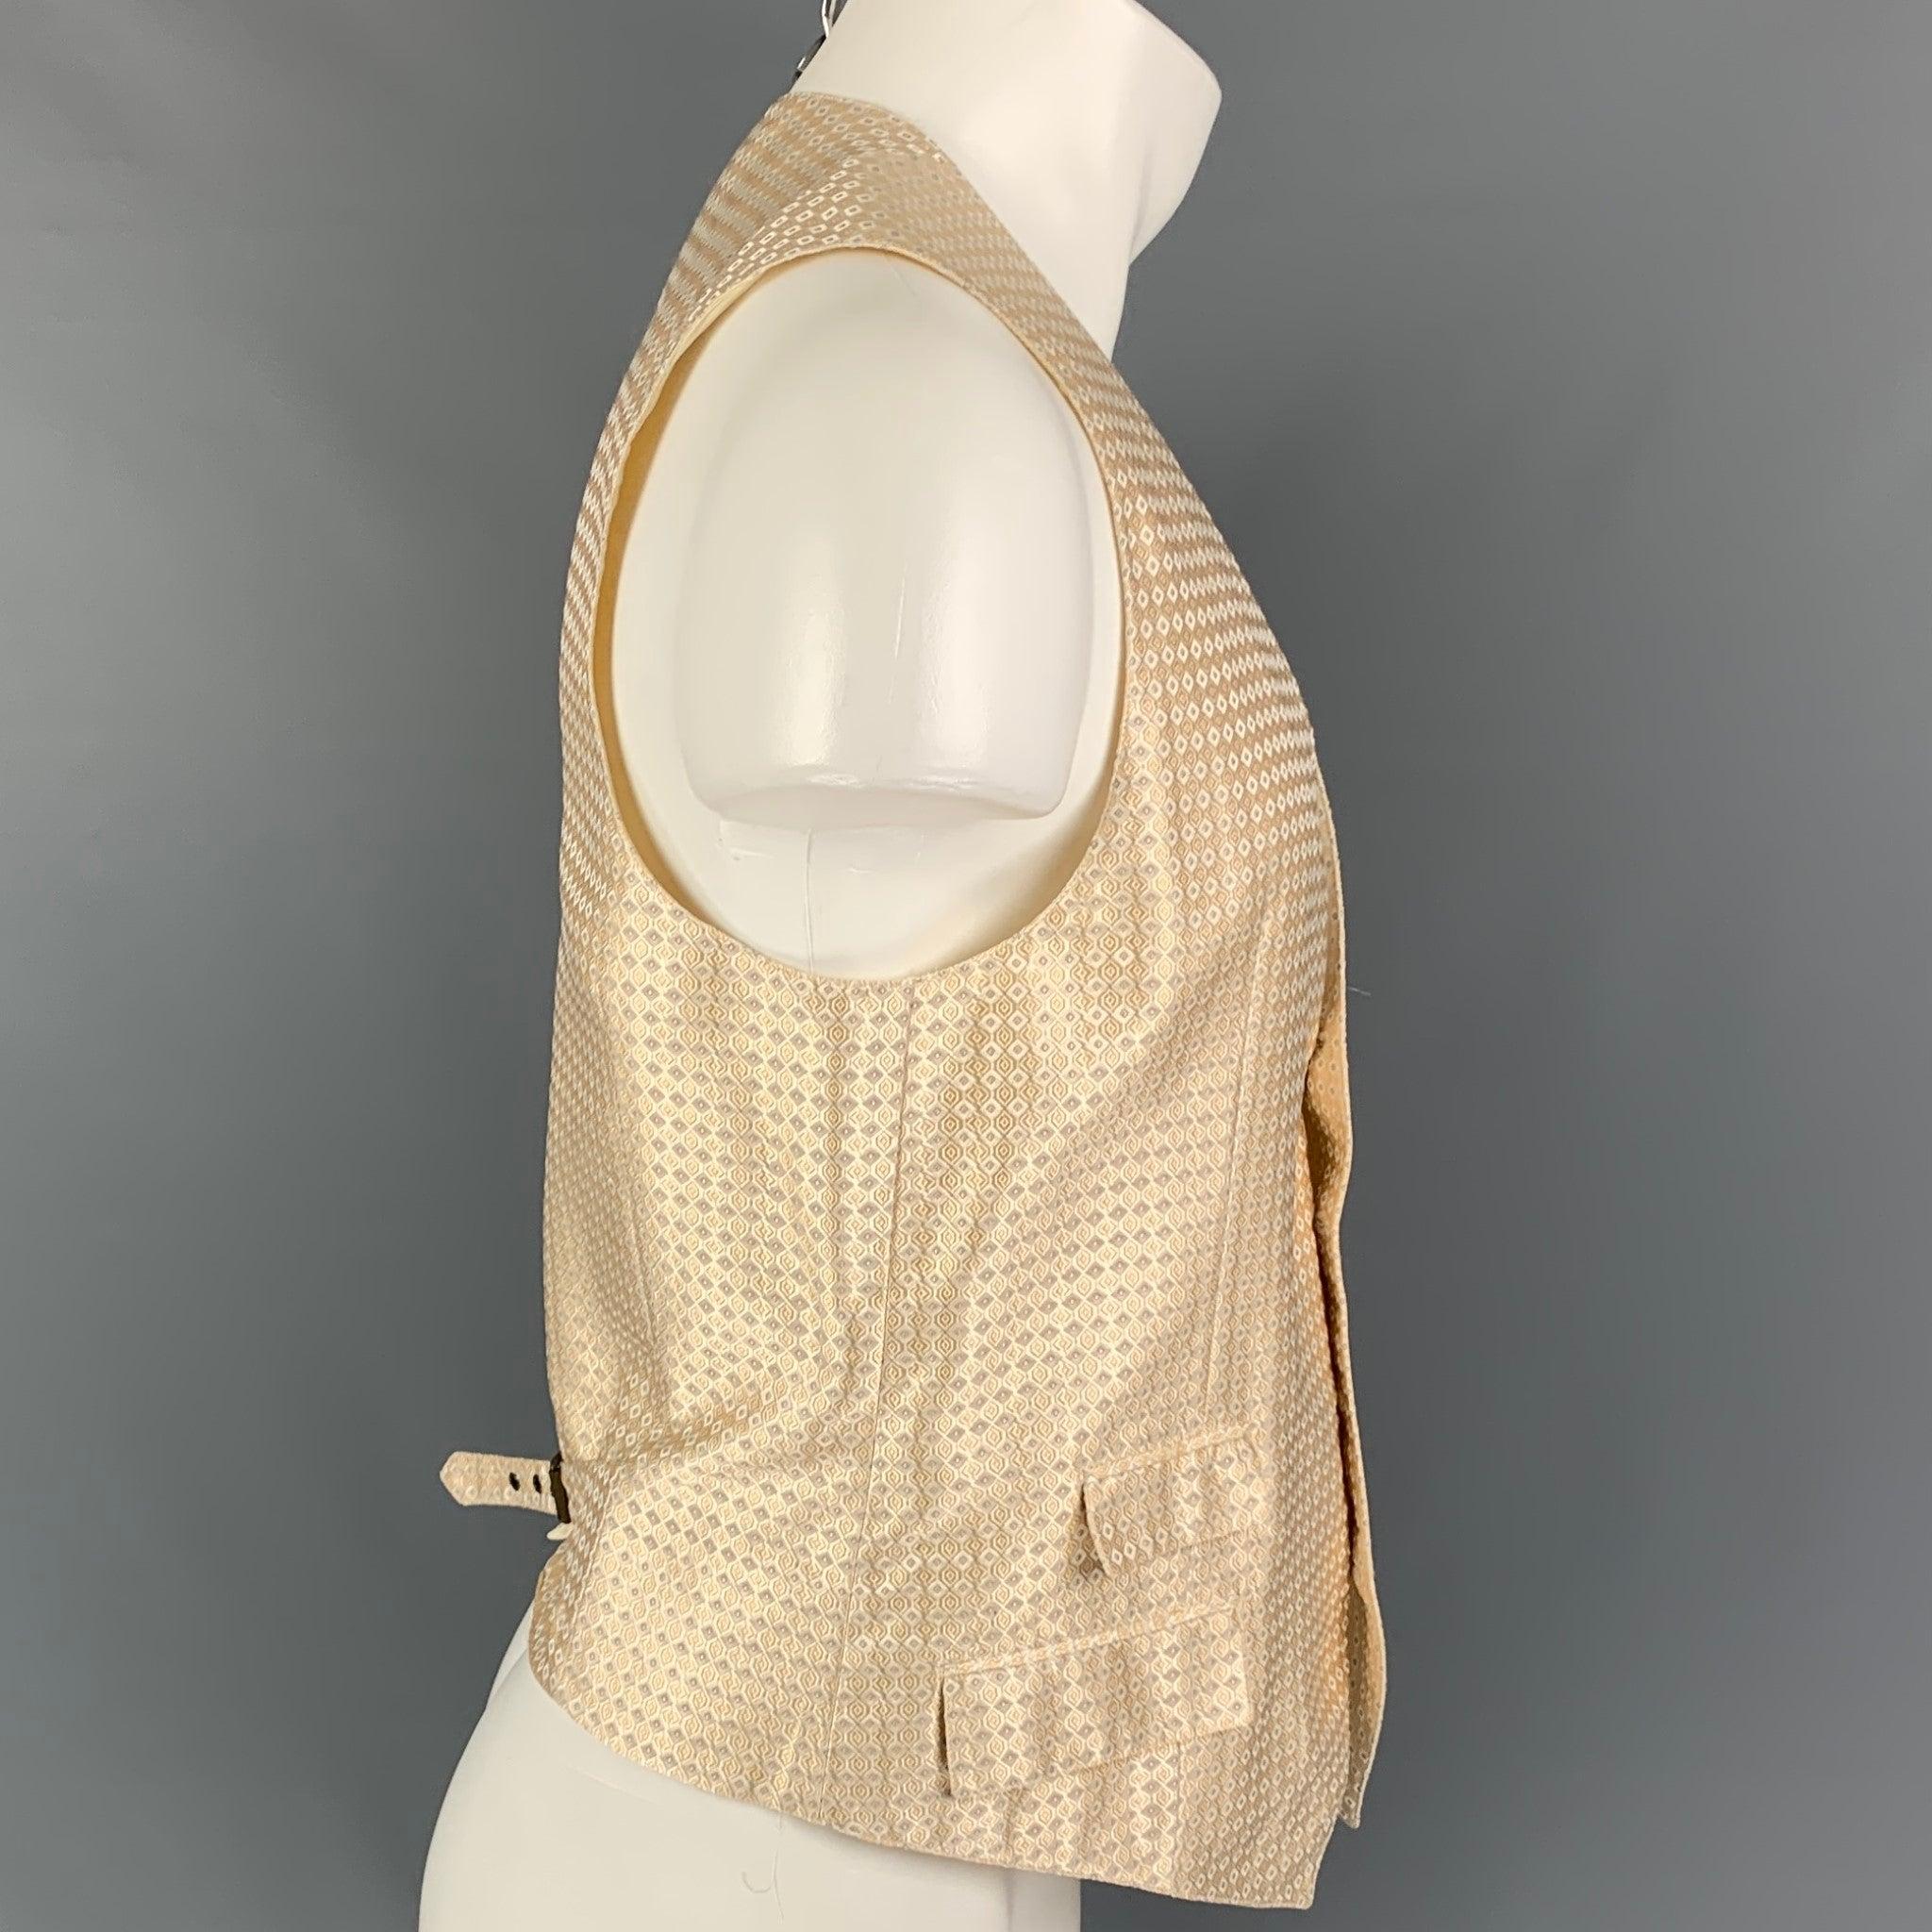 ALEXANDER McQUEEN vest comes in a beige jacquard silk featuring a back adjustable strap, flap pockets, and a buttoned closure. Made in Italy.
Very Good
Pre-Owned Condition. 

Marked:   50 

Measurements: 
 
Shoulder: 13.5 inches  Chest: 38 inches 